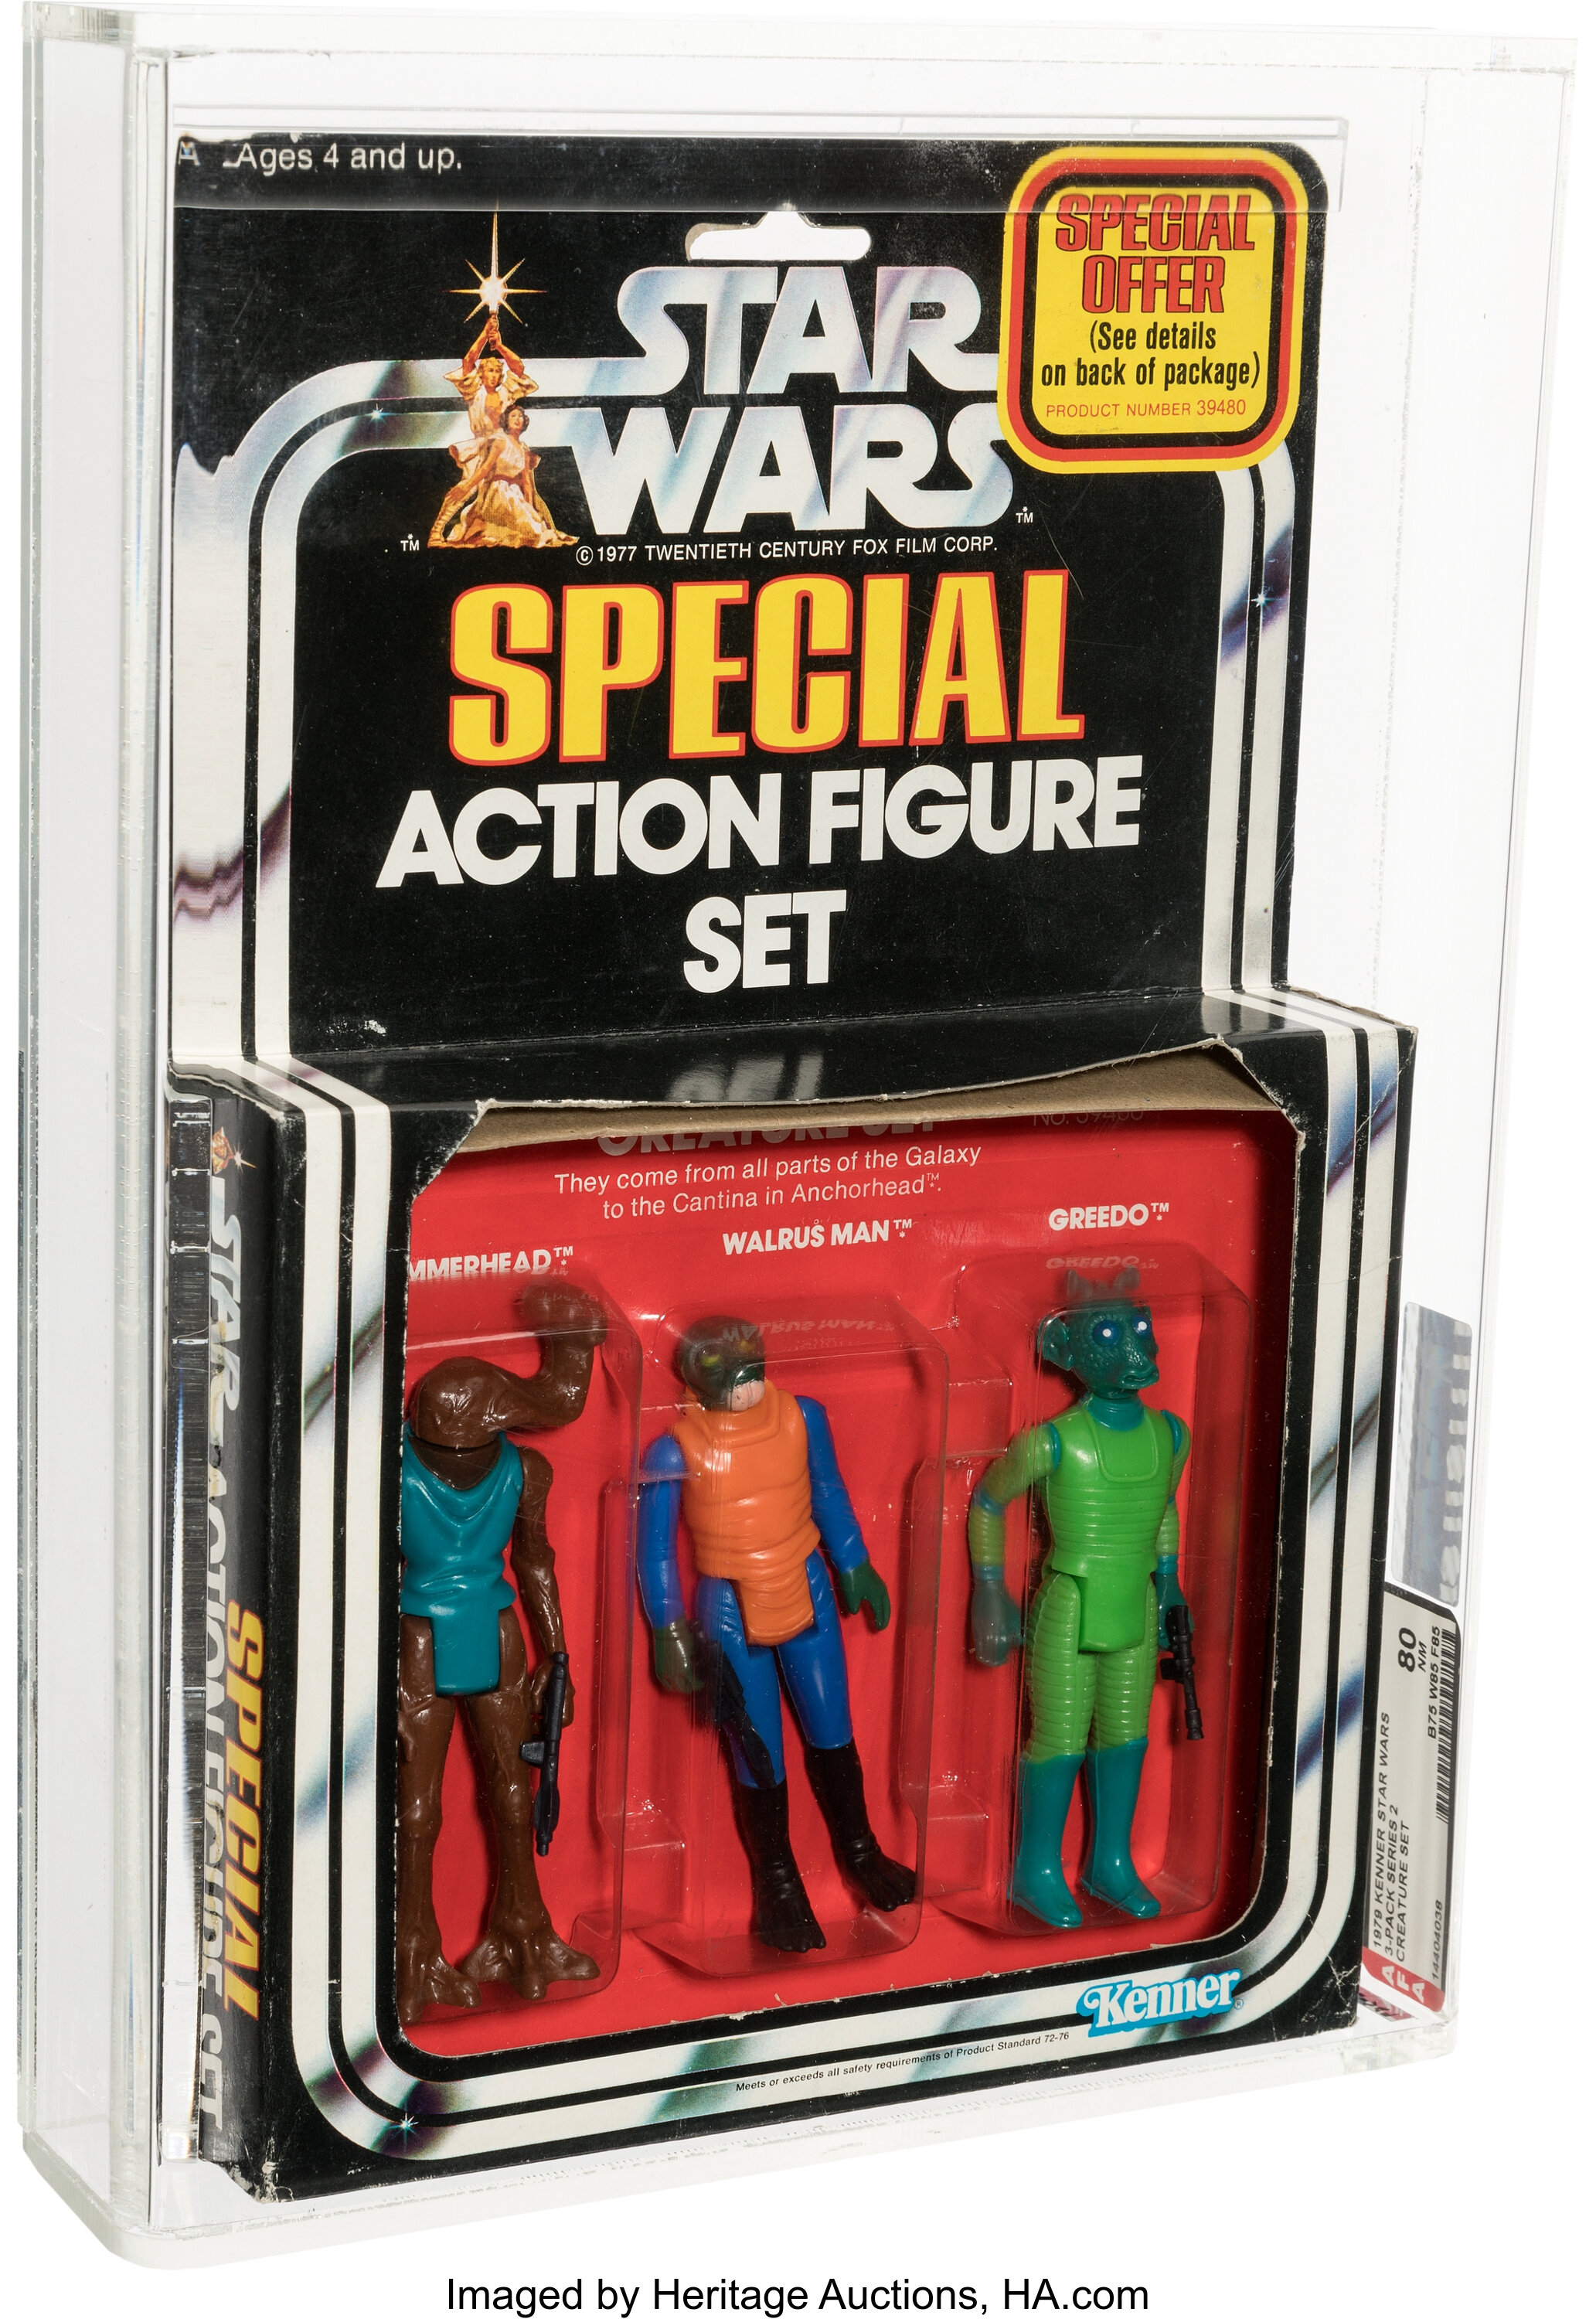 Star Wars - Creature 3-Pack Action Figure (Kenner, 1978) AFA 80